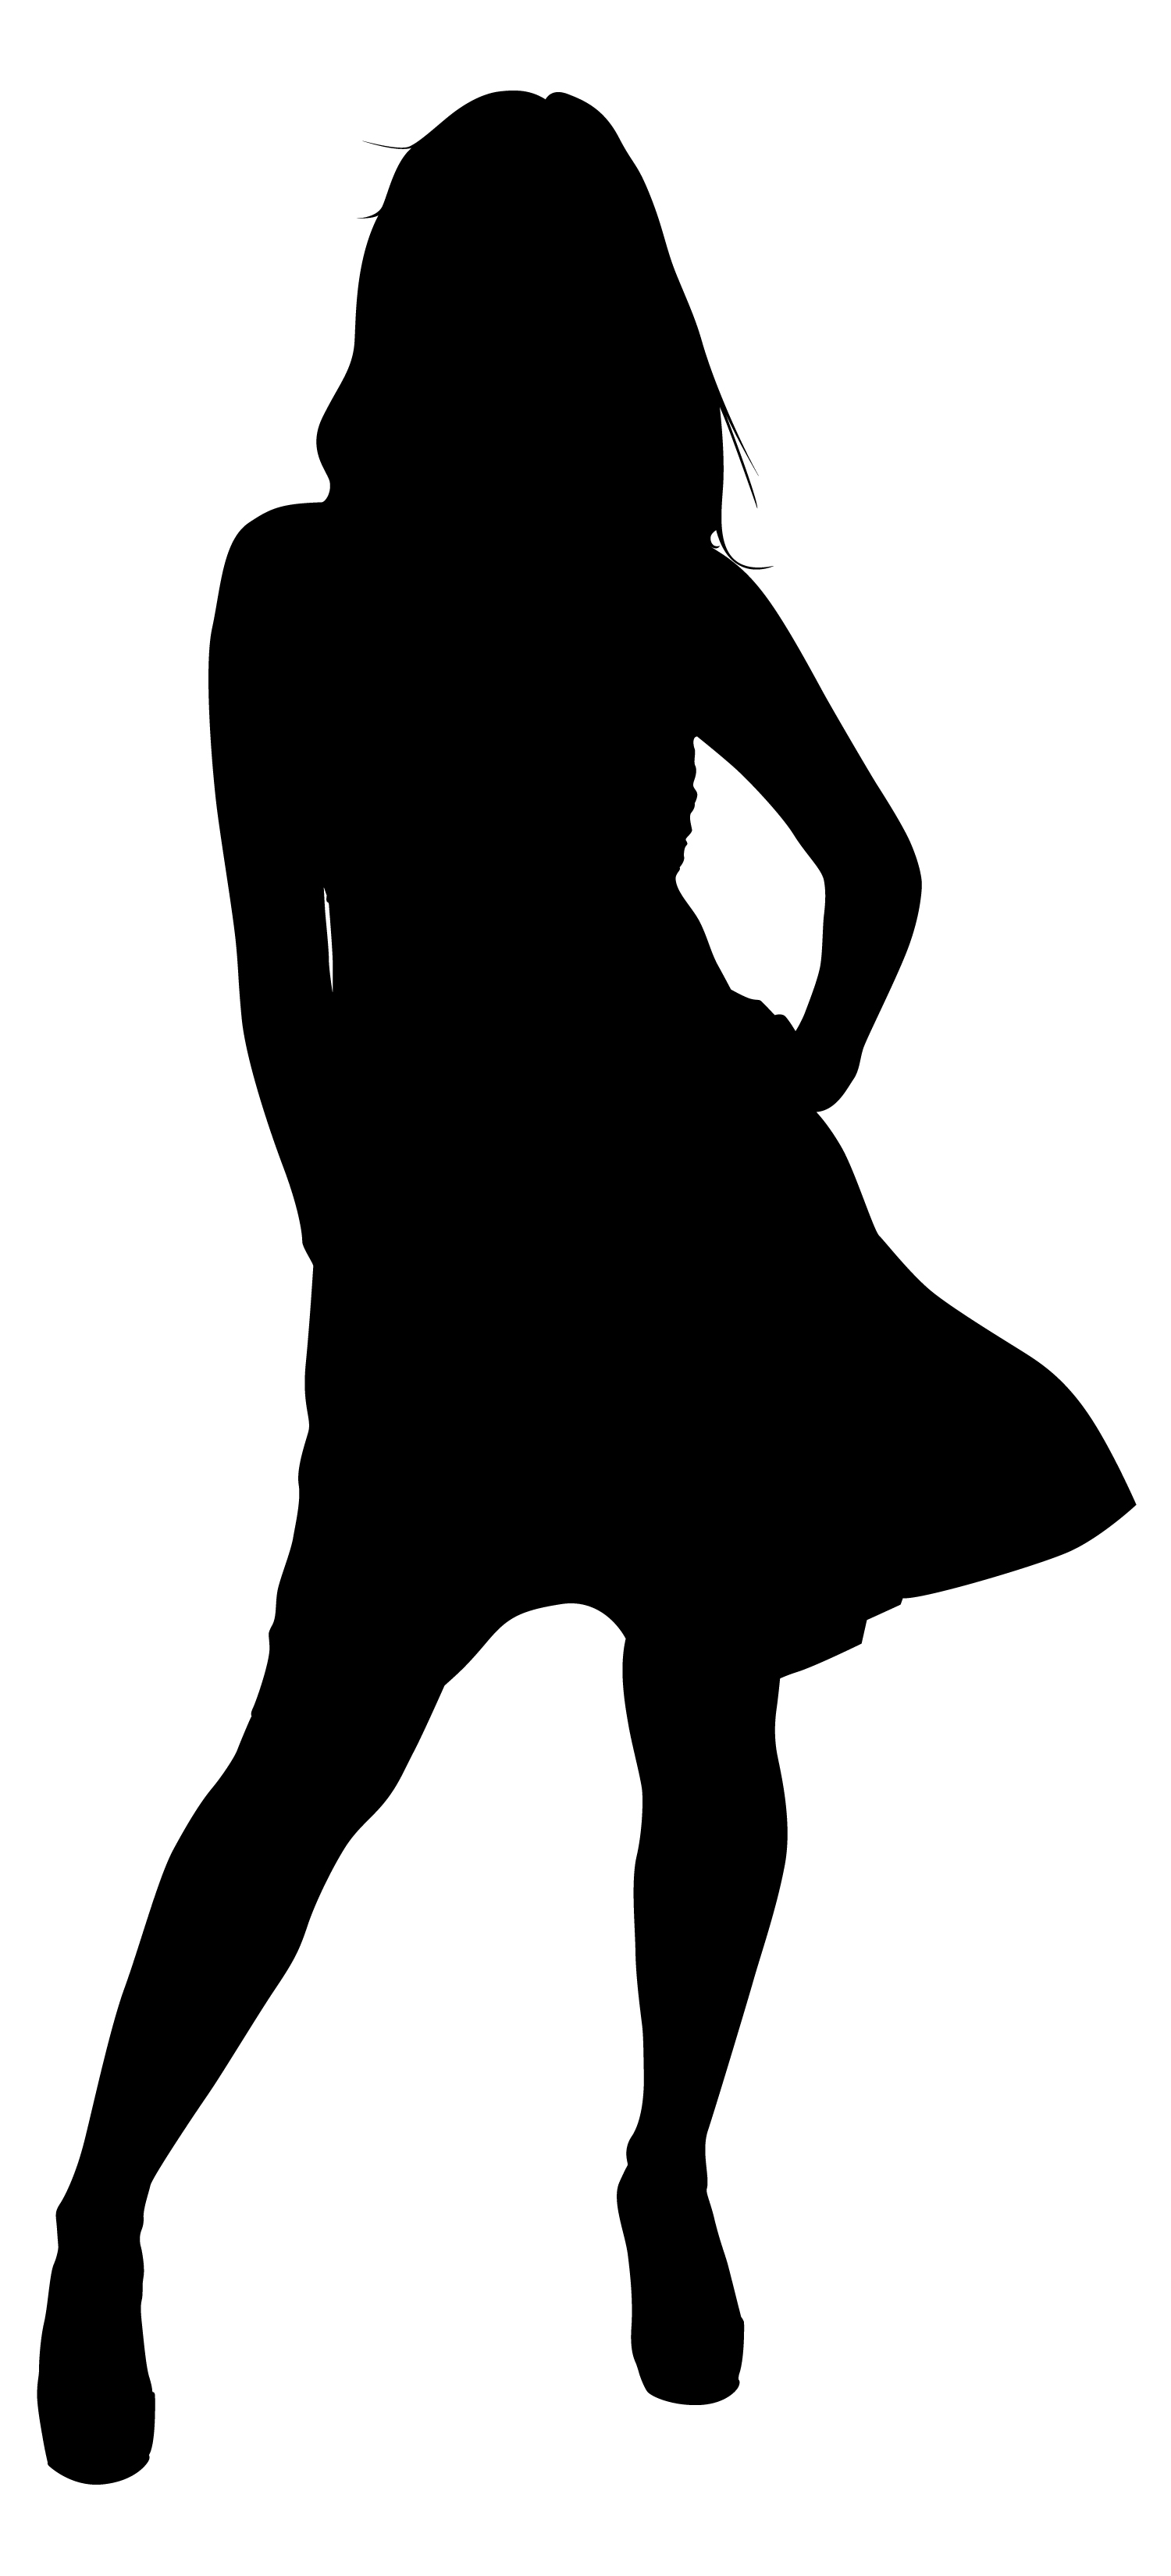 Woman Silhouette Png images & pictures - NearPics